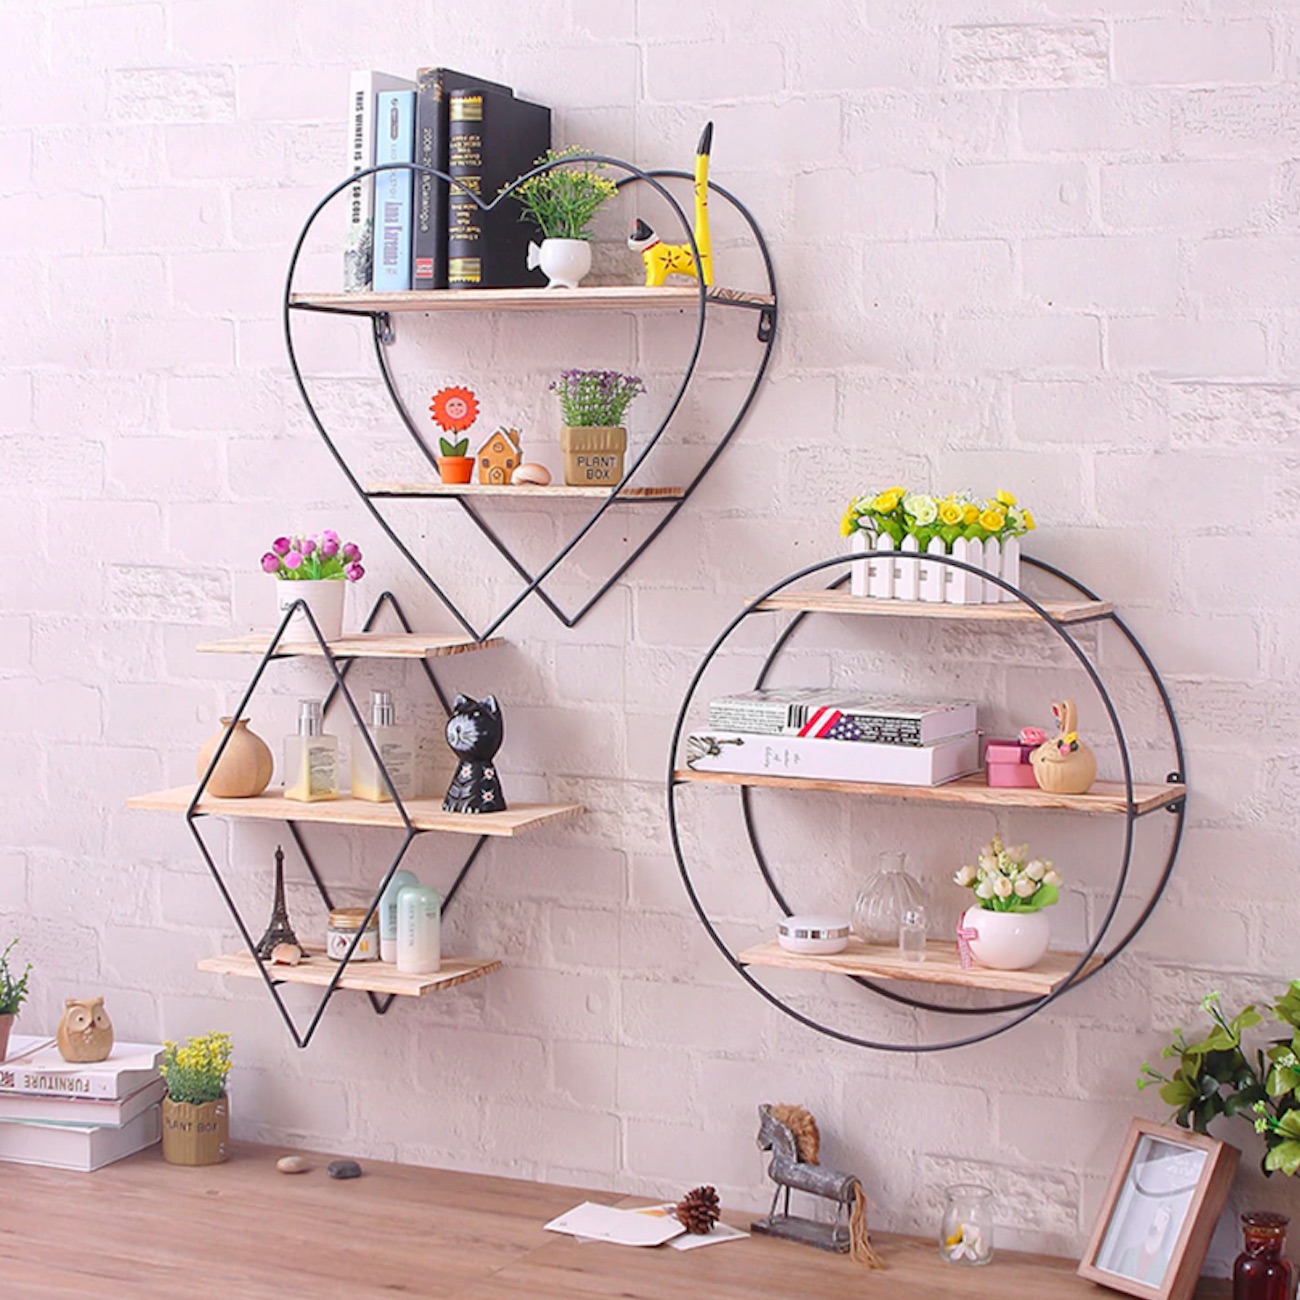 Rustic Iron & Wood Modern Shape Shelves add some personality to your storage